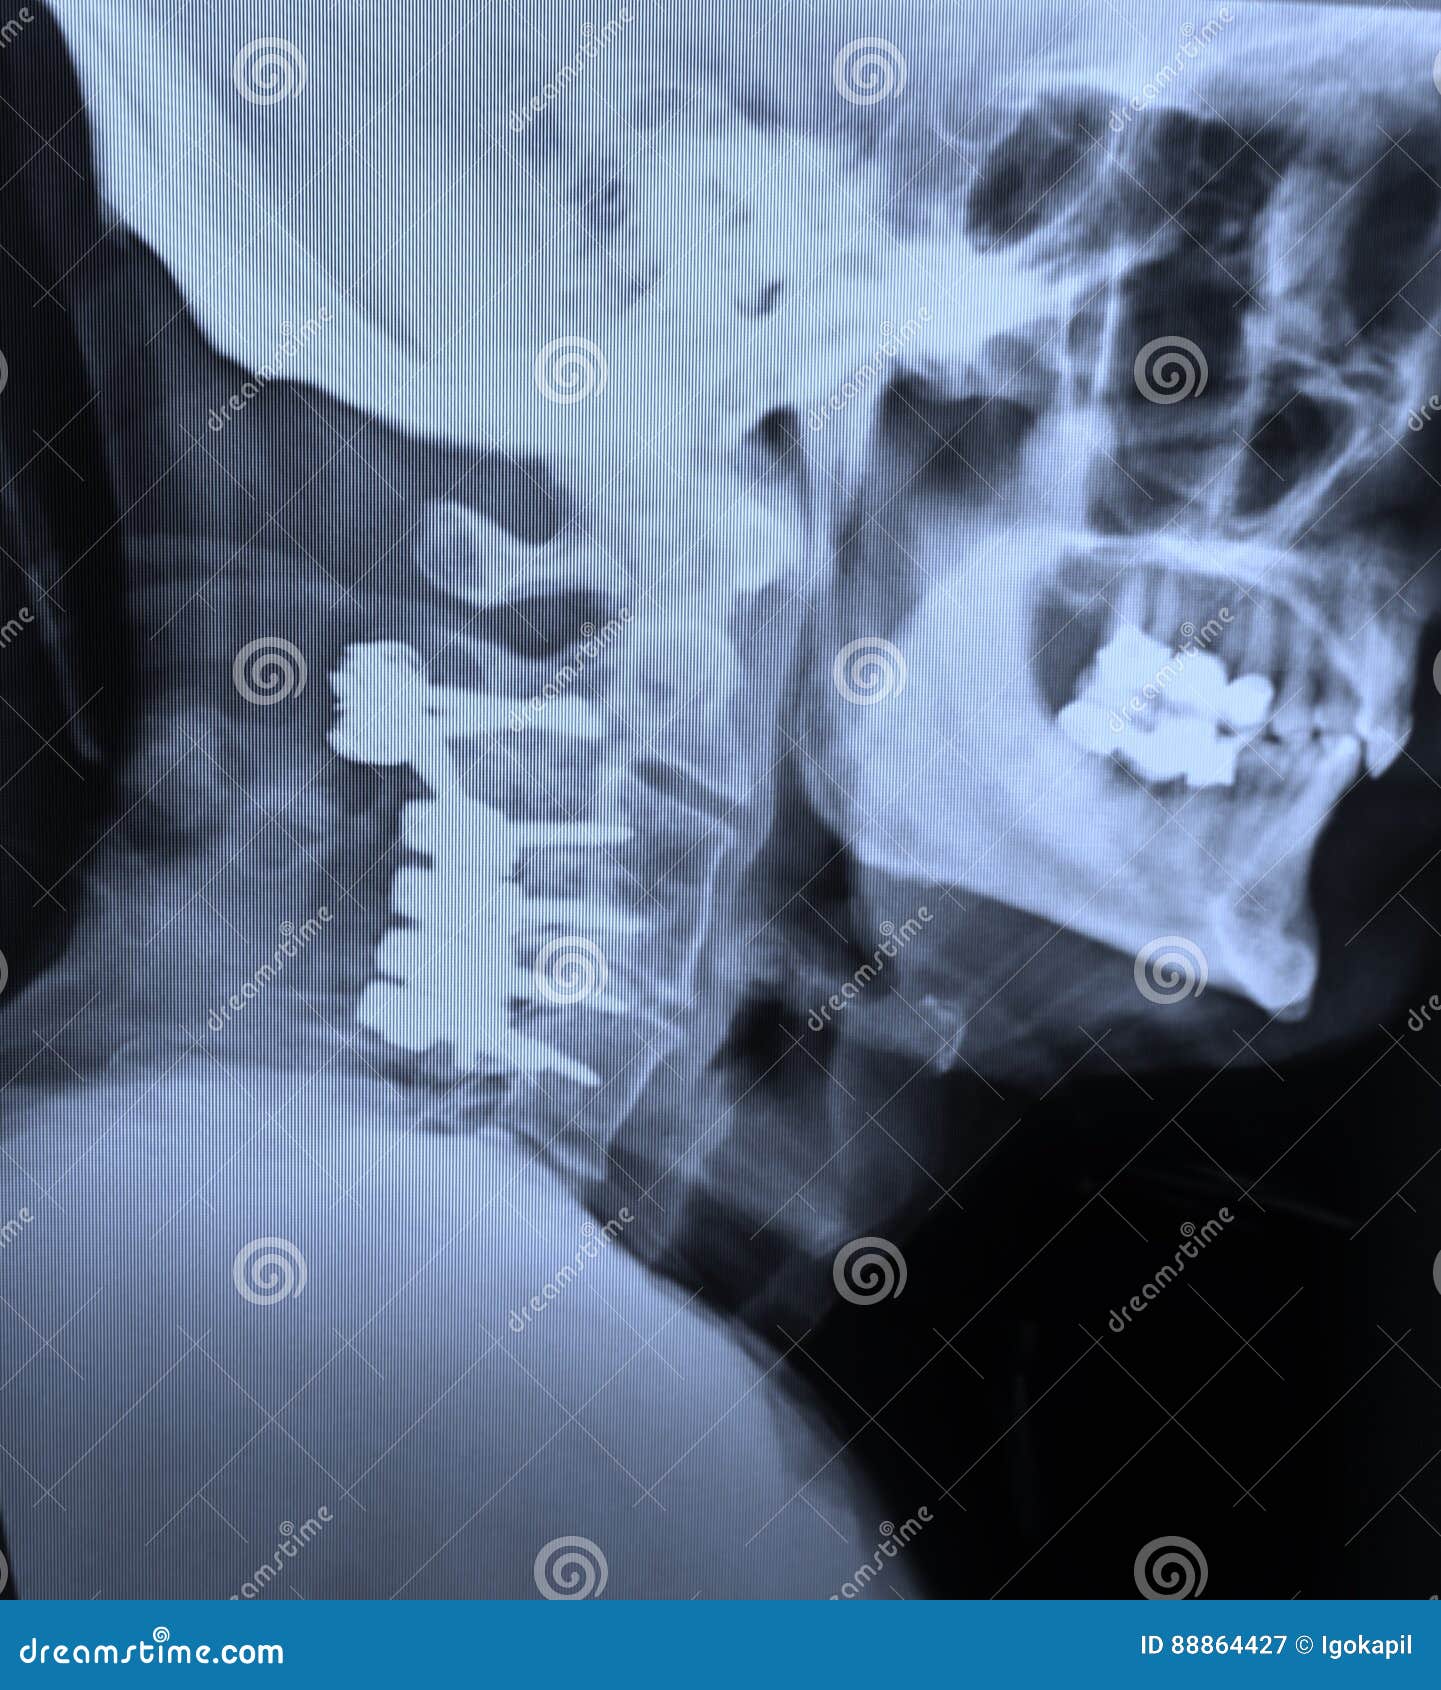 xray cervical spine fixation hardware after car accident